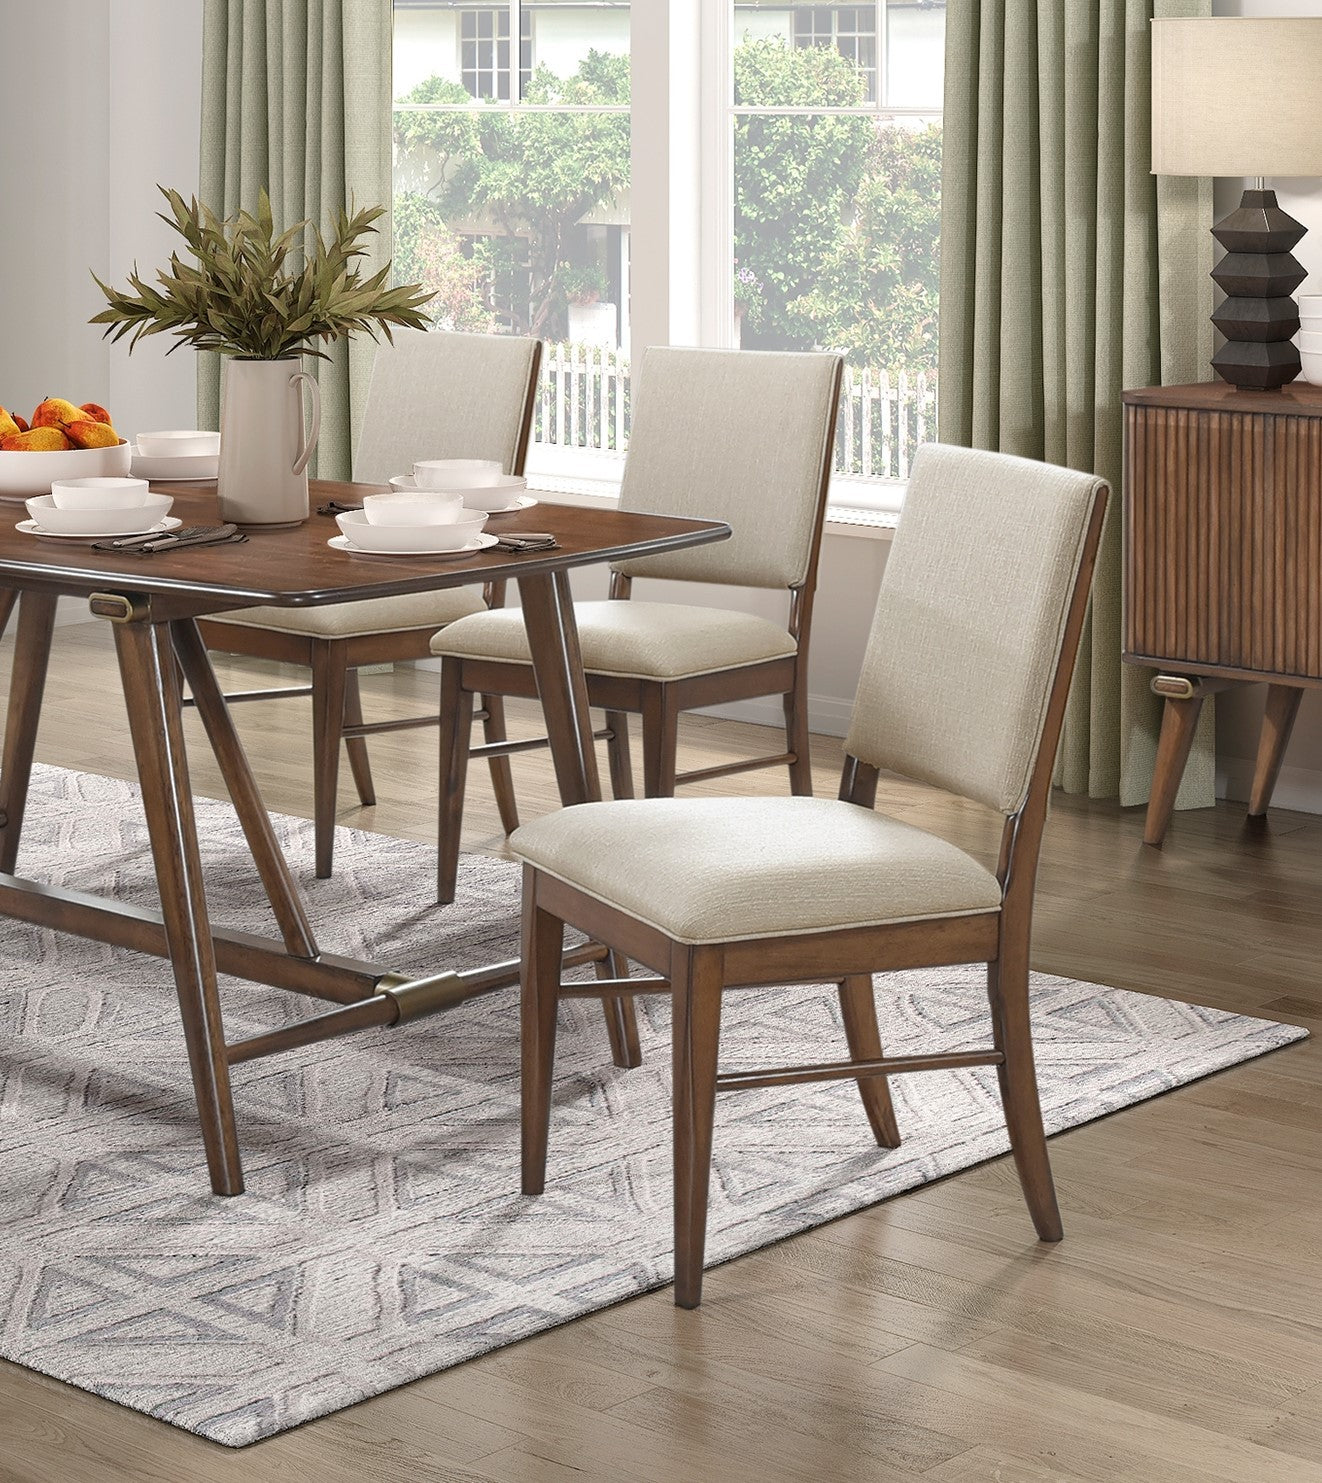 Modern Design 5pc Dining Set Table and 4x Side Chairs brown mix-seats 4-dining room-modern-dining table